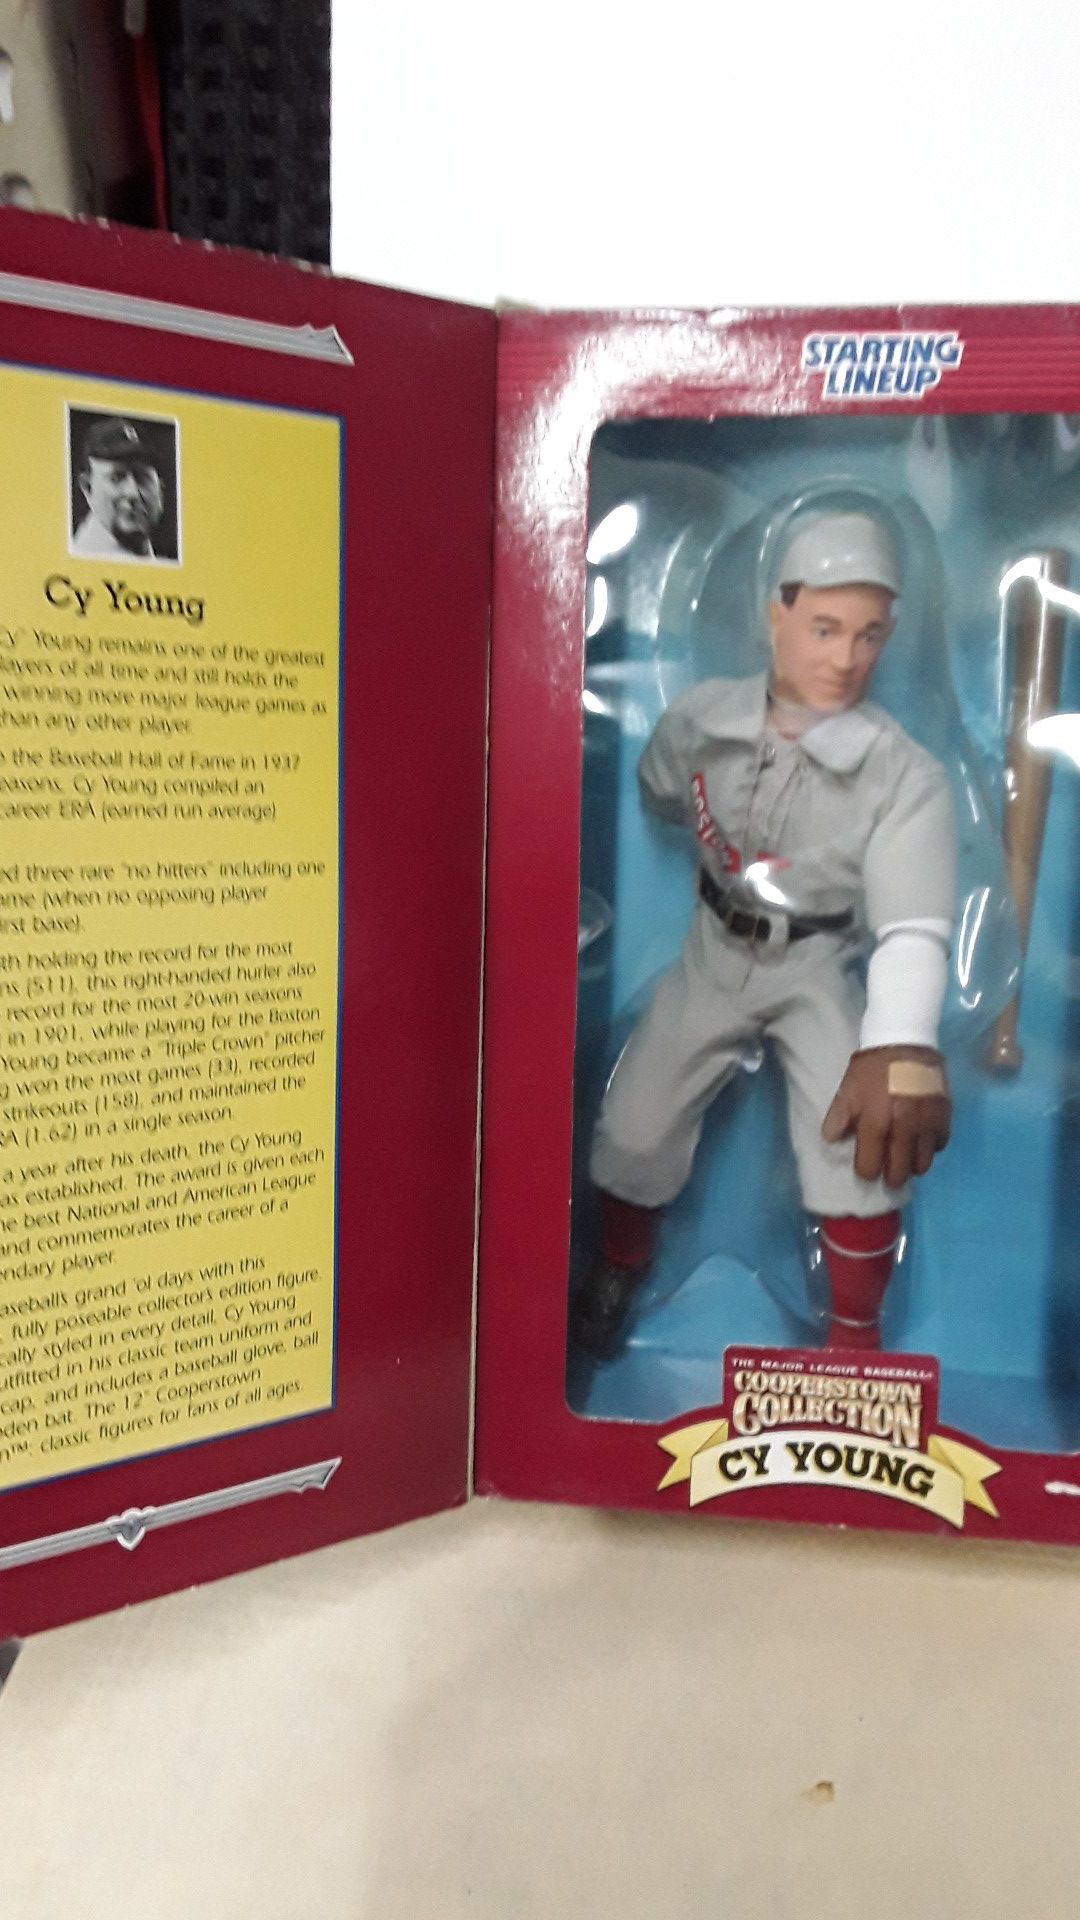 1996 CY YOUNG starting lineup cooperstown collection figurine